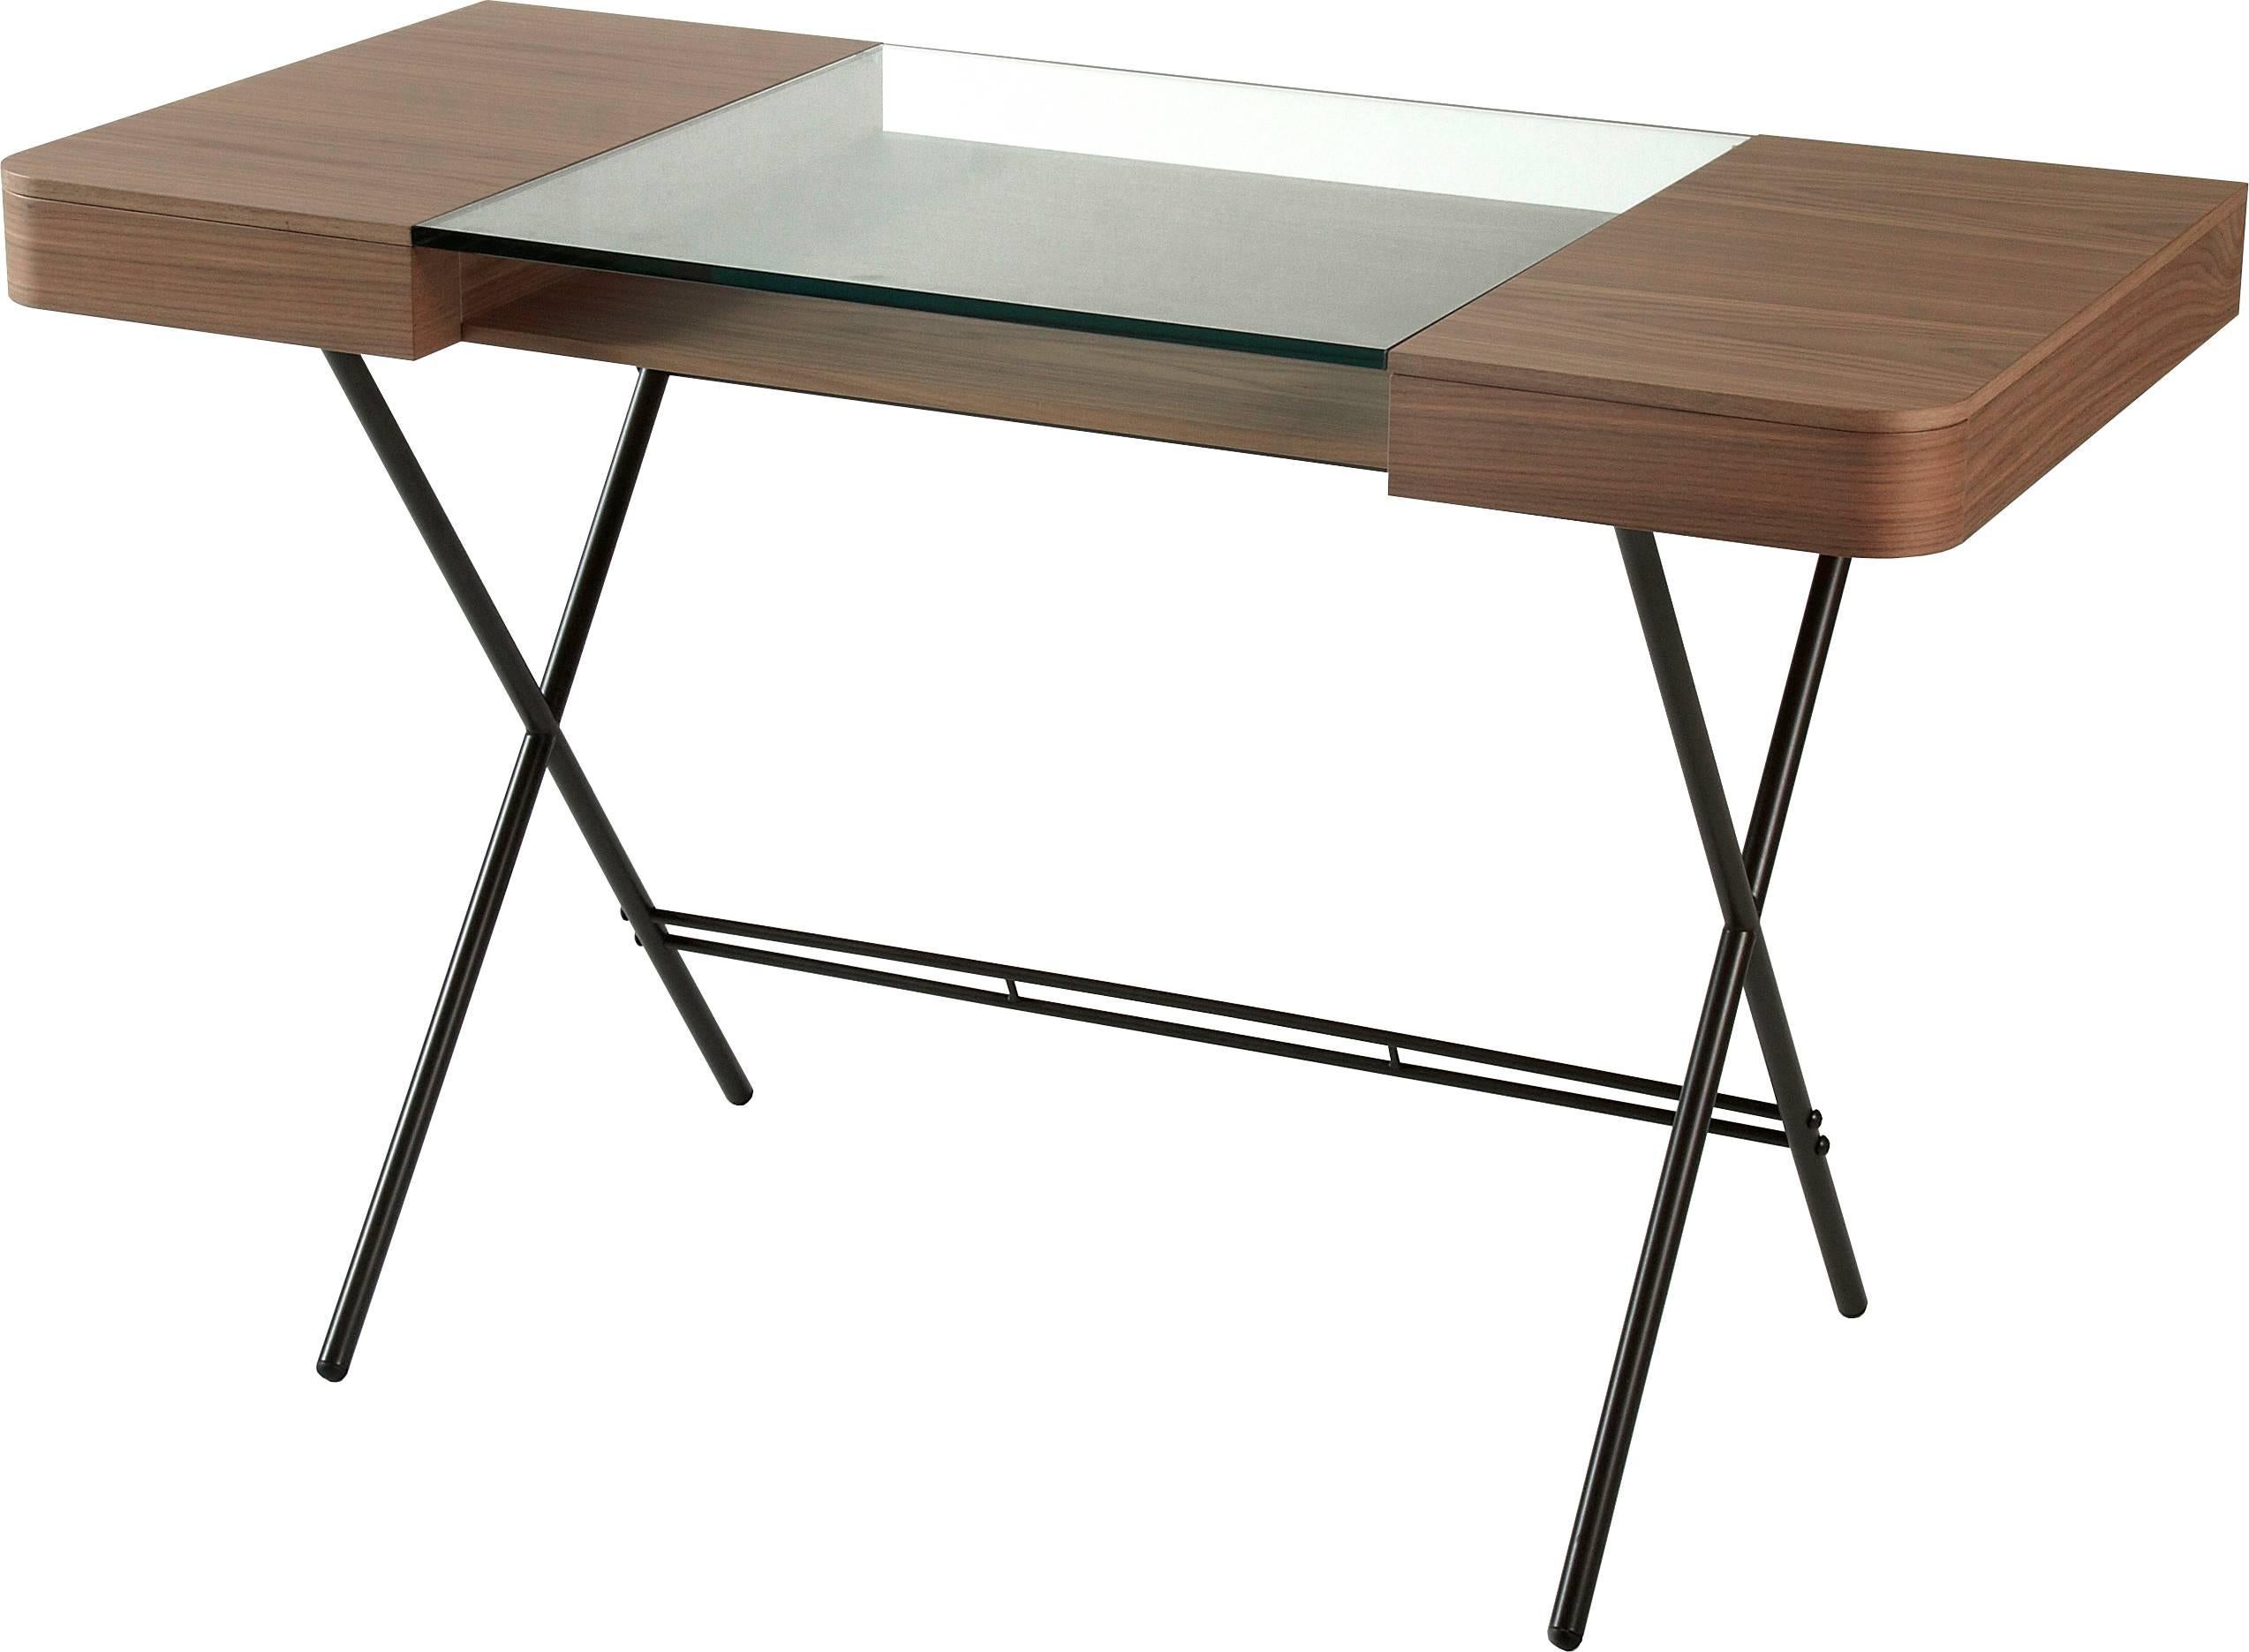 Contemporary Cosimo Desk by Marco Zanuso Jr. with Walnut Veneer and Glass Top im Angebot 2